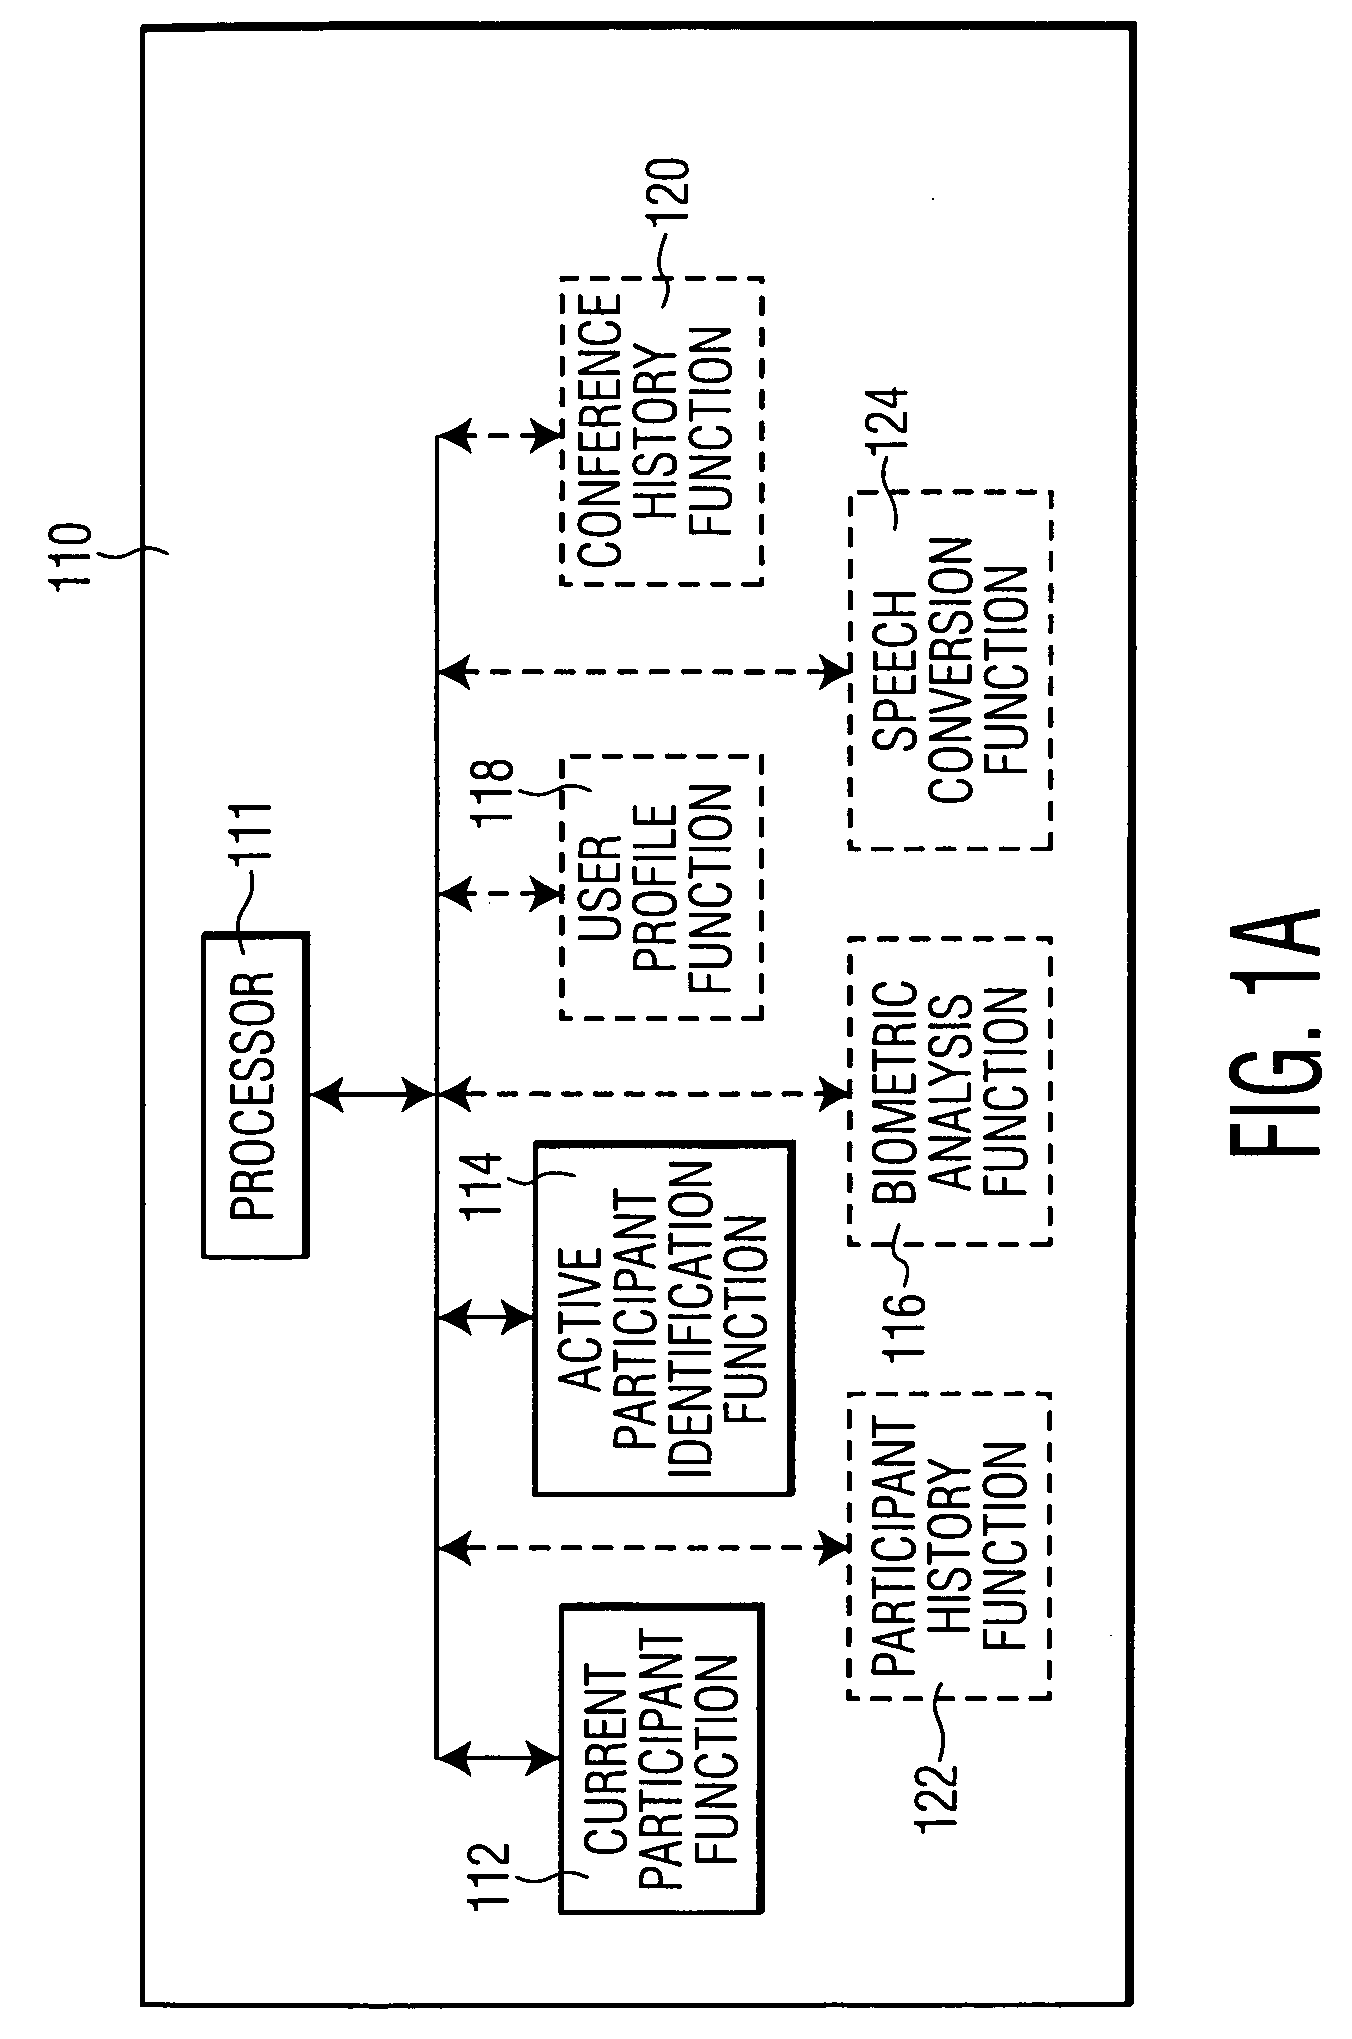 Method and apparatus for disseminating information associated with an active conference participant to other conference participants